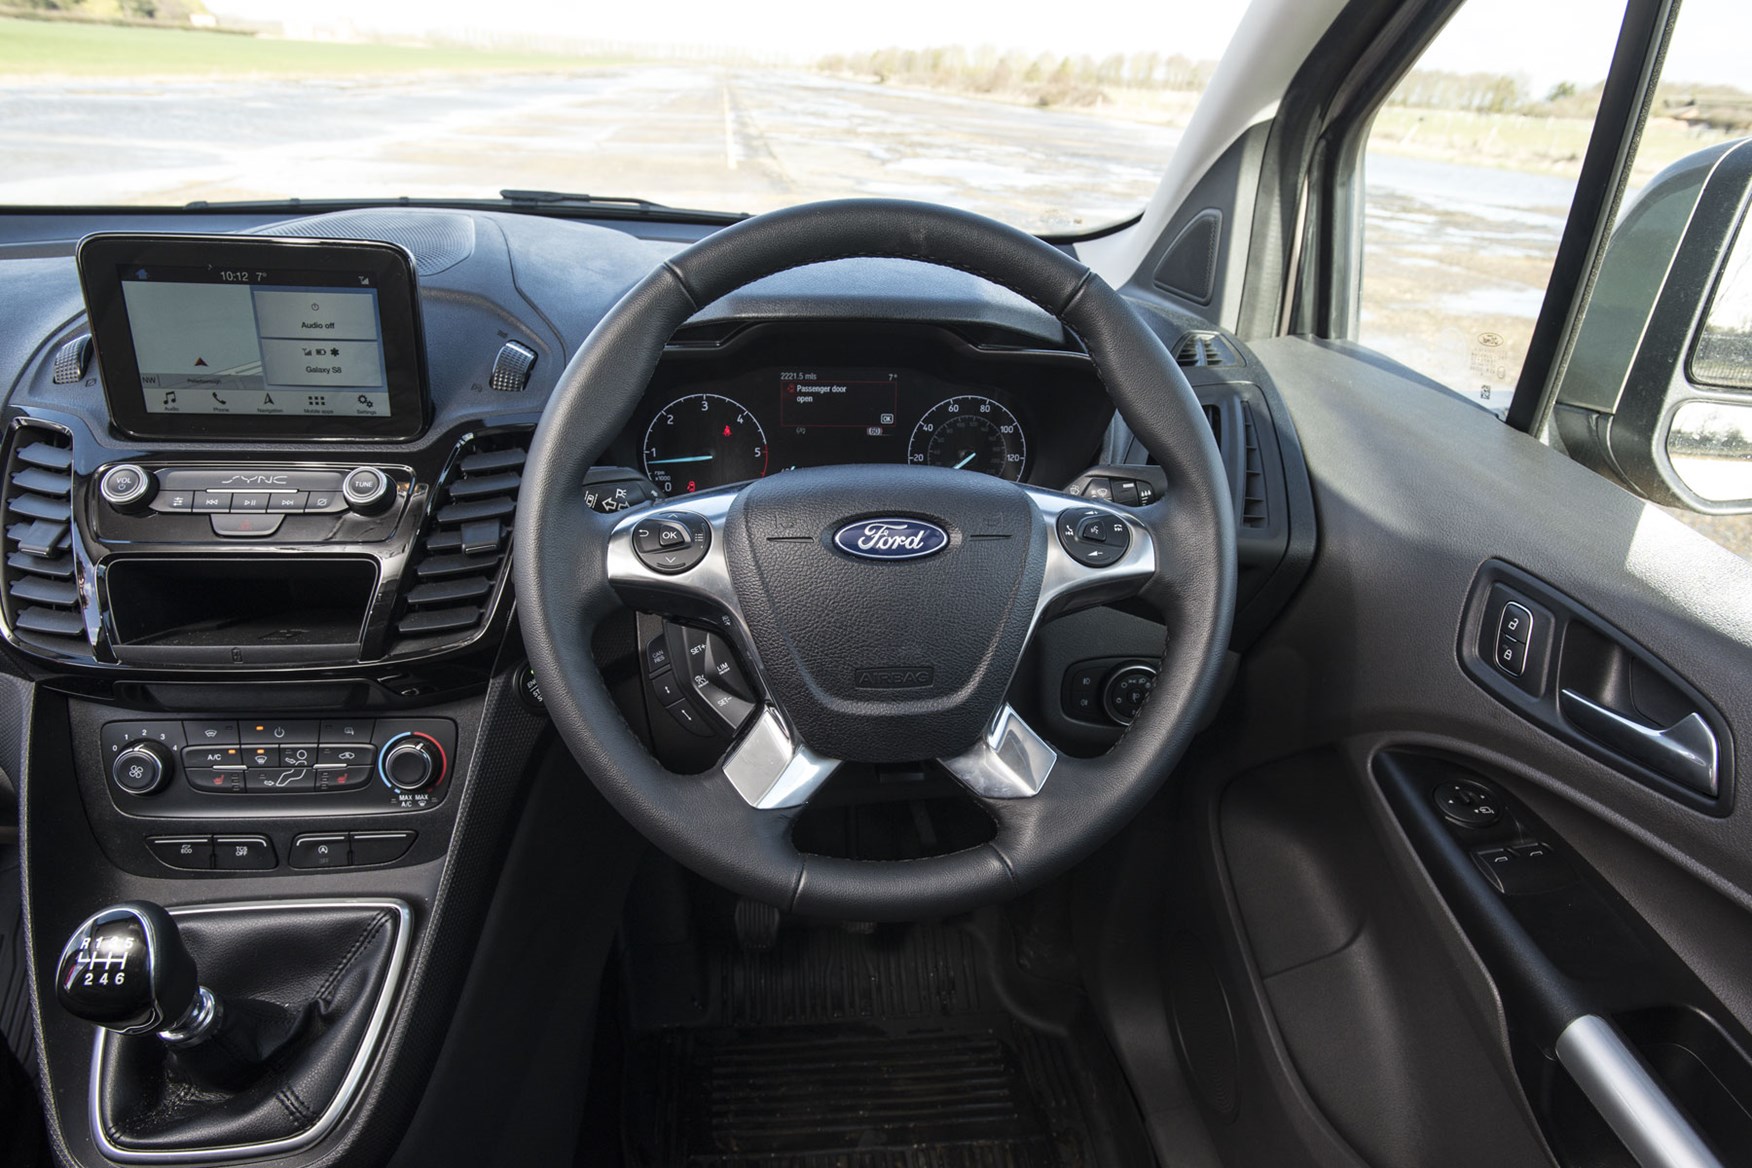 Ford Transit Connect review - 2018 cab interior, steering wheel and dials